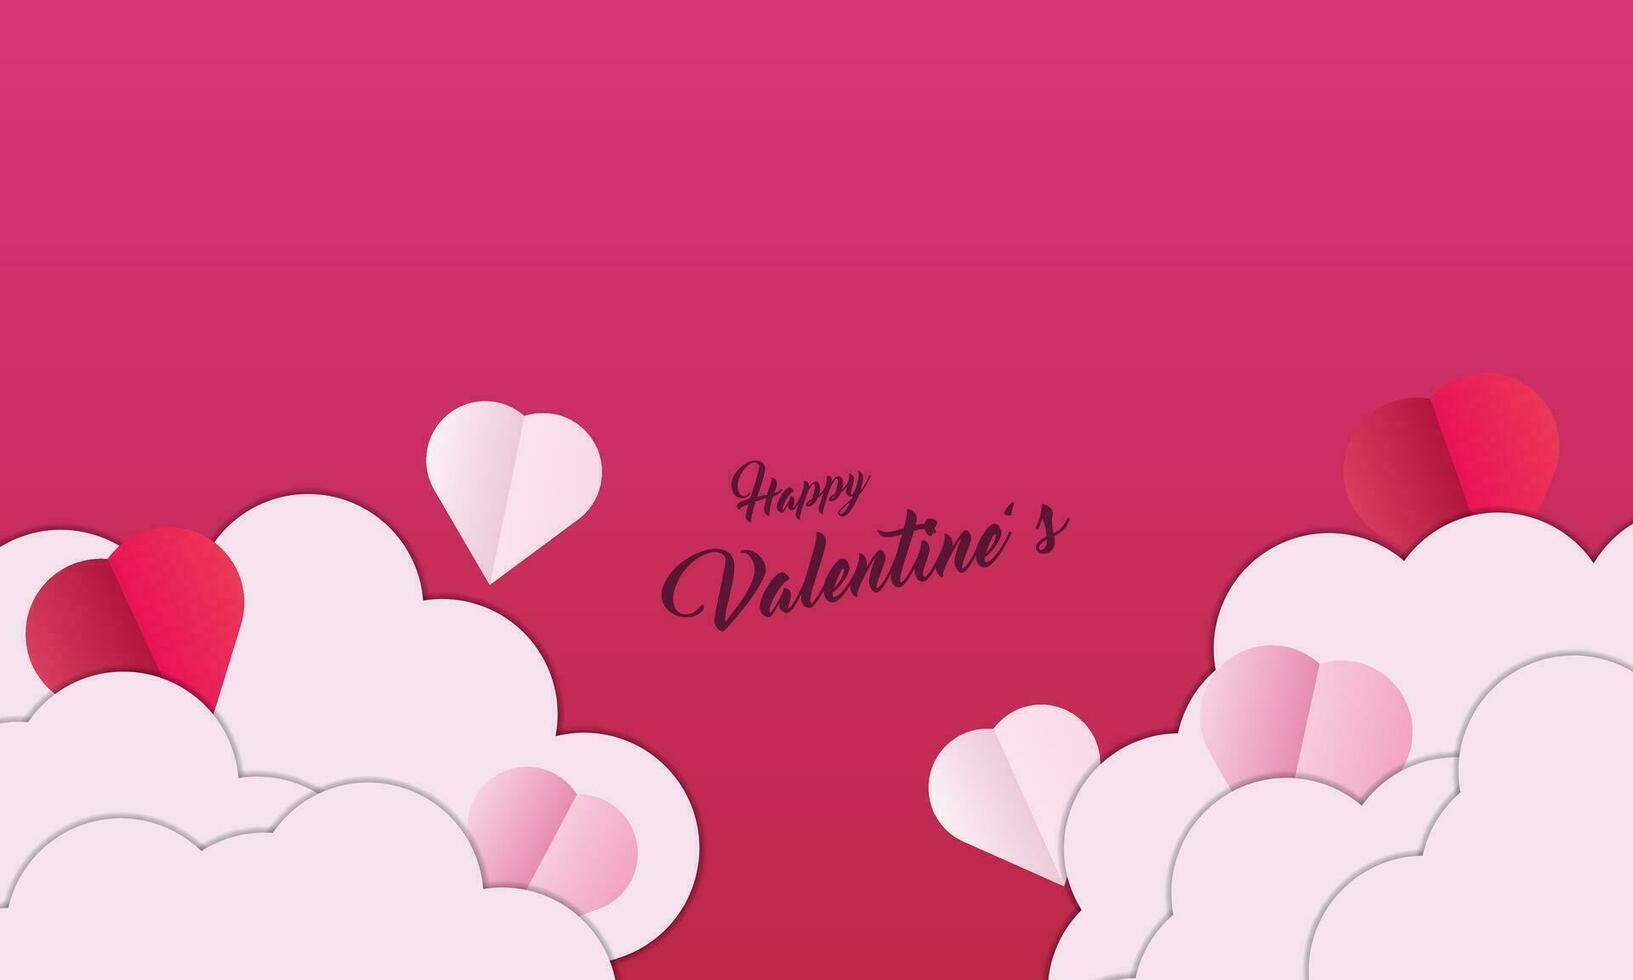 Background design with paper cut clouds. Place for text. Happy Valentine's Day sale header with hanging hearts. vector